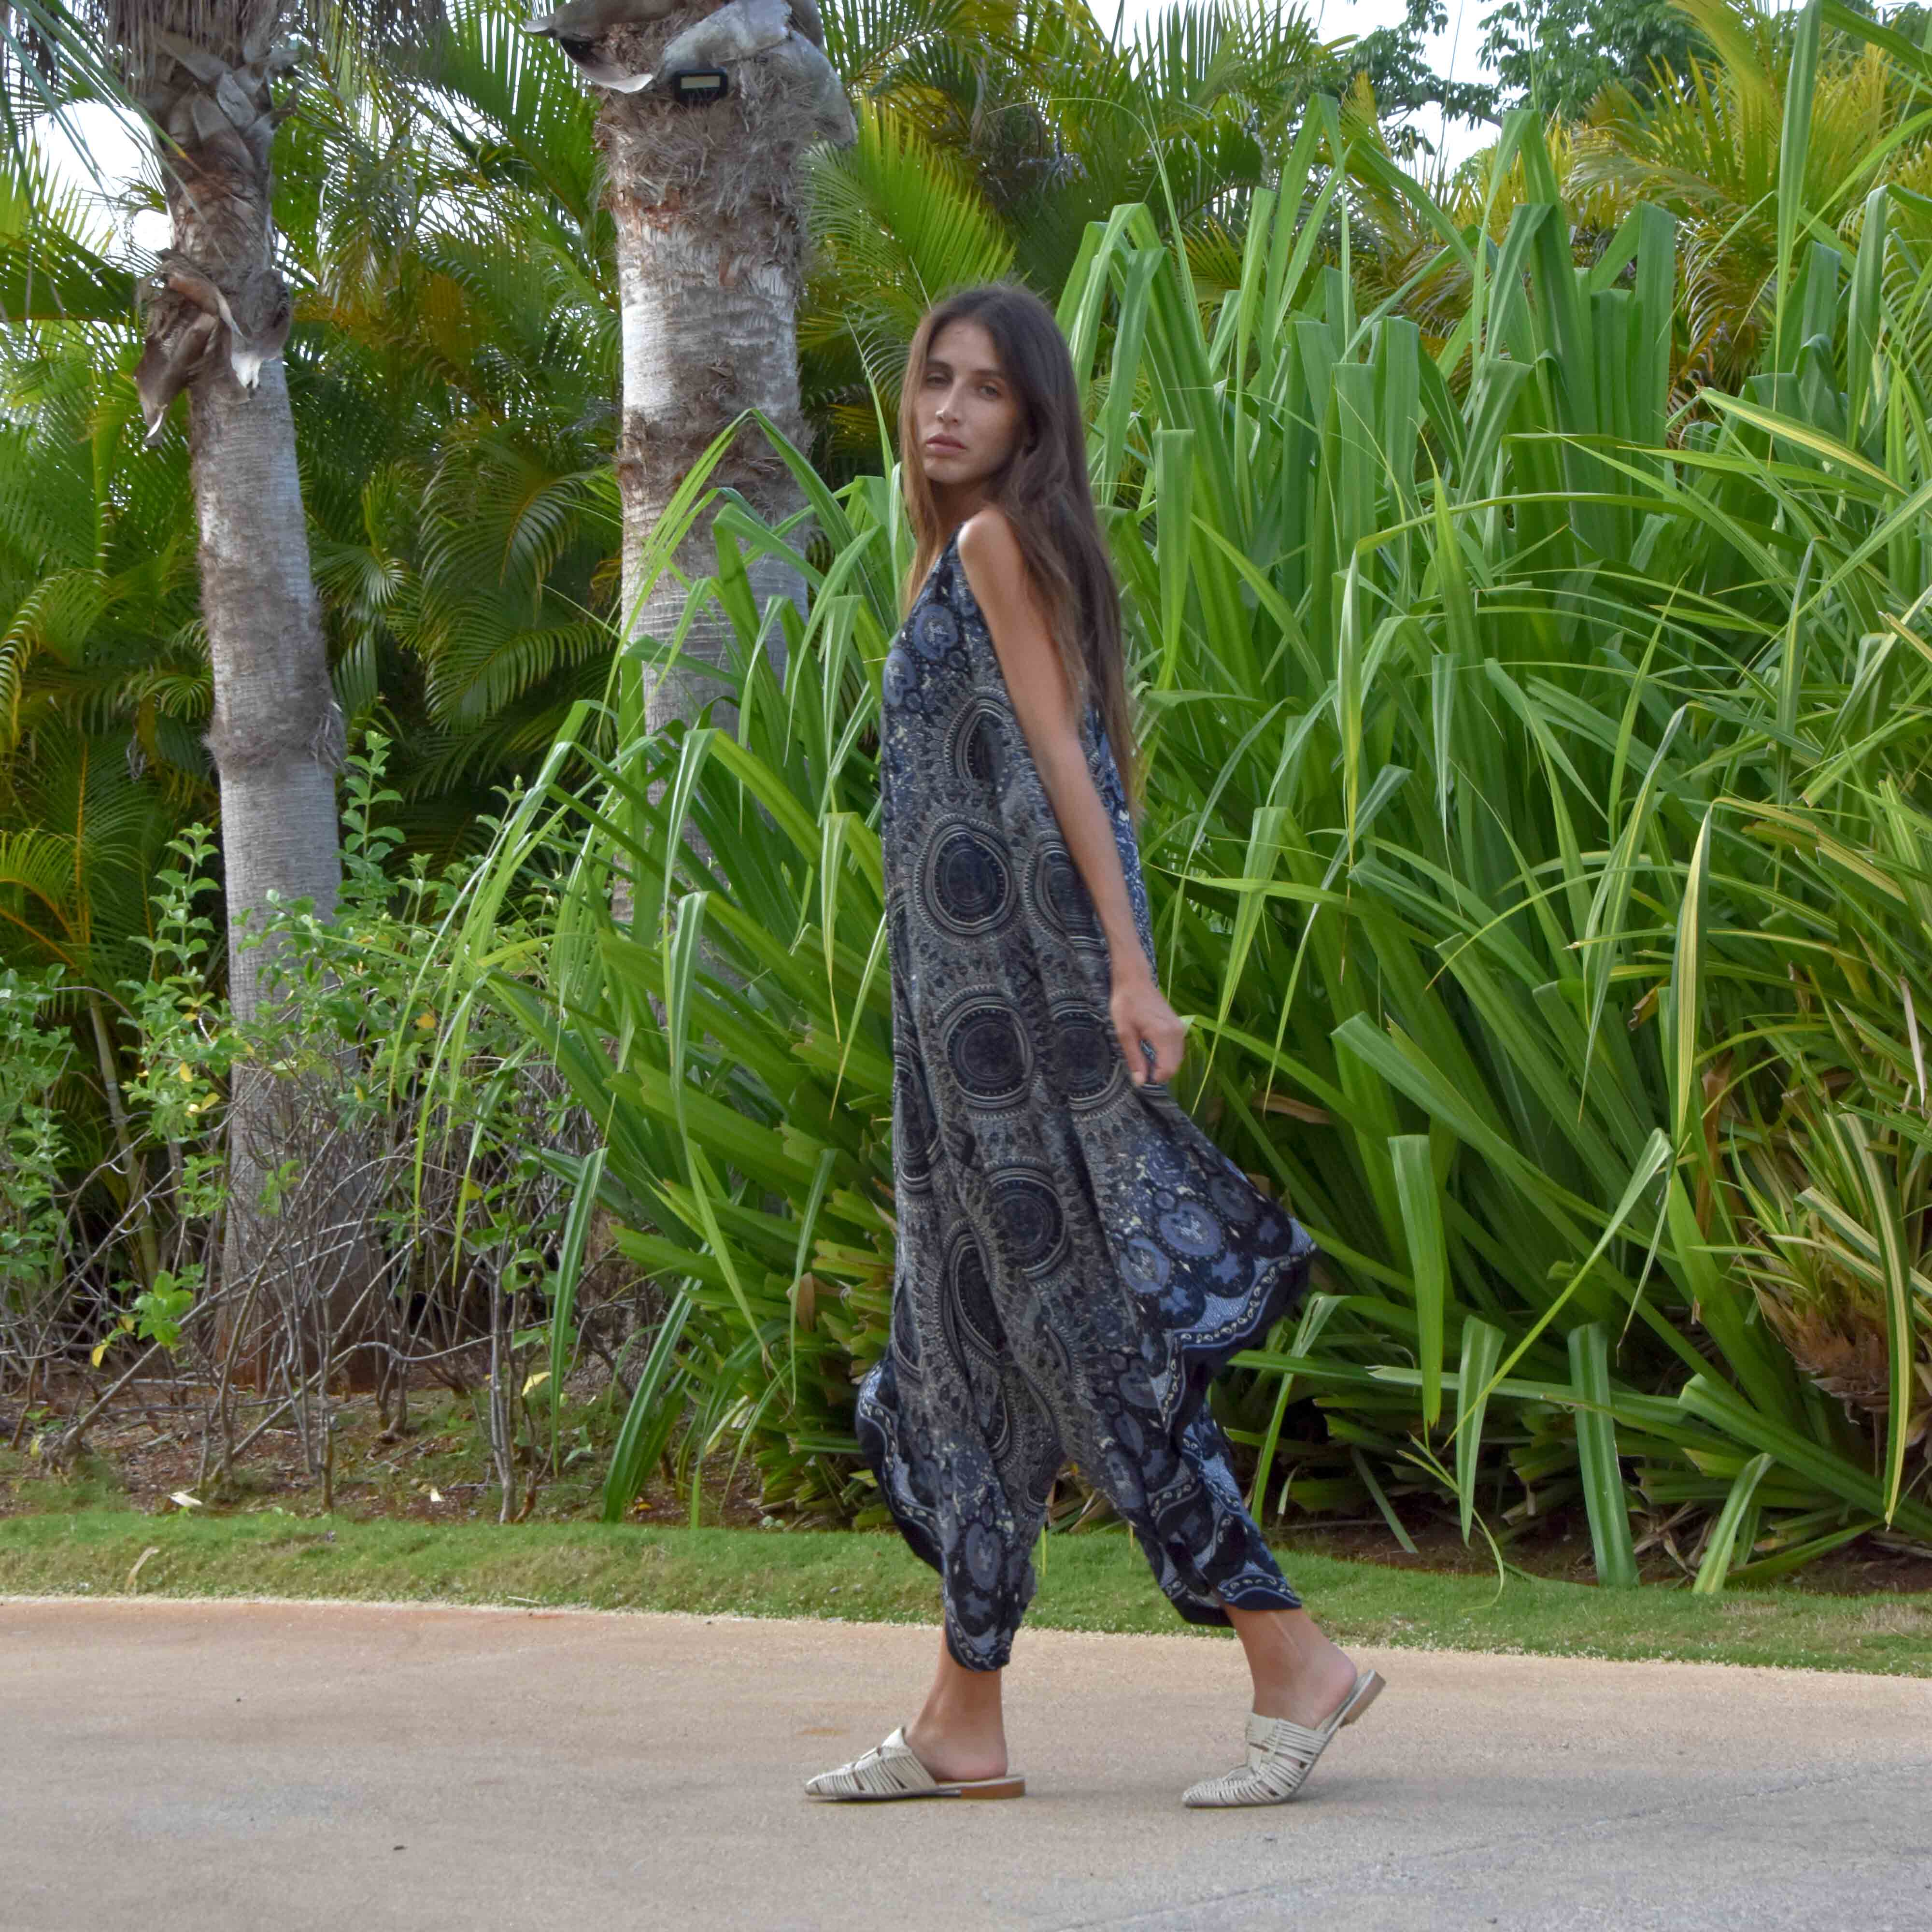 TULUM JUMPSUIT DRESS Elepanta Jumpsuits - Buy Today Elephant Pants Jewelry And Bohemian Clothes Handmade In Thailand Help To Save The Elephants FairTrade And Vegan